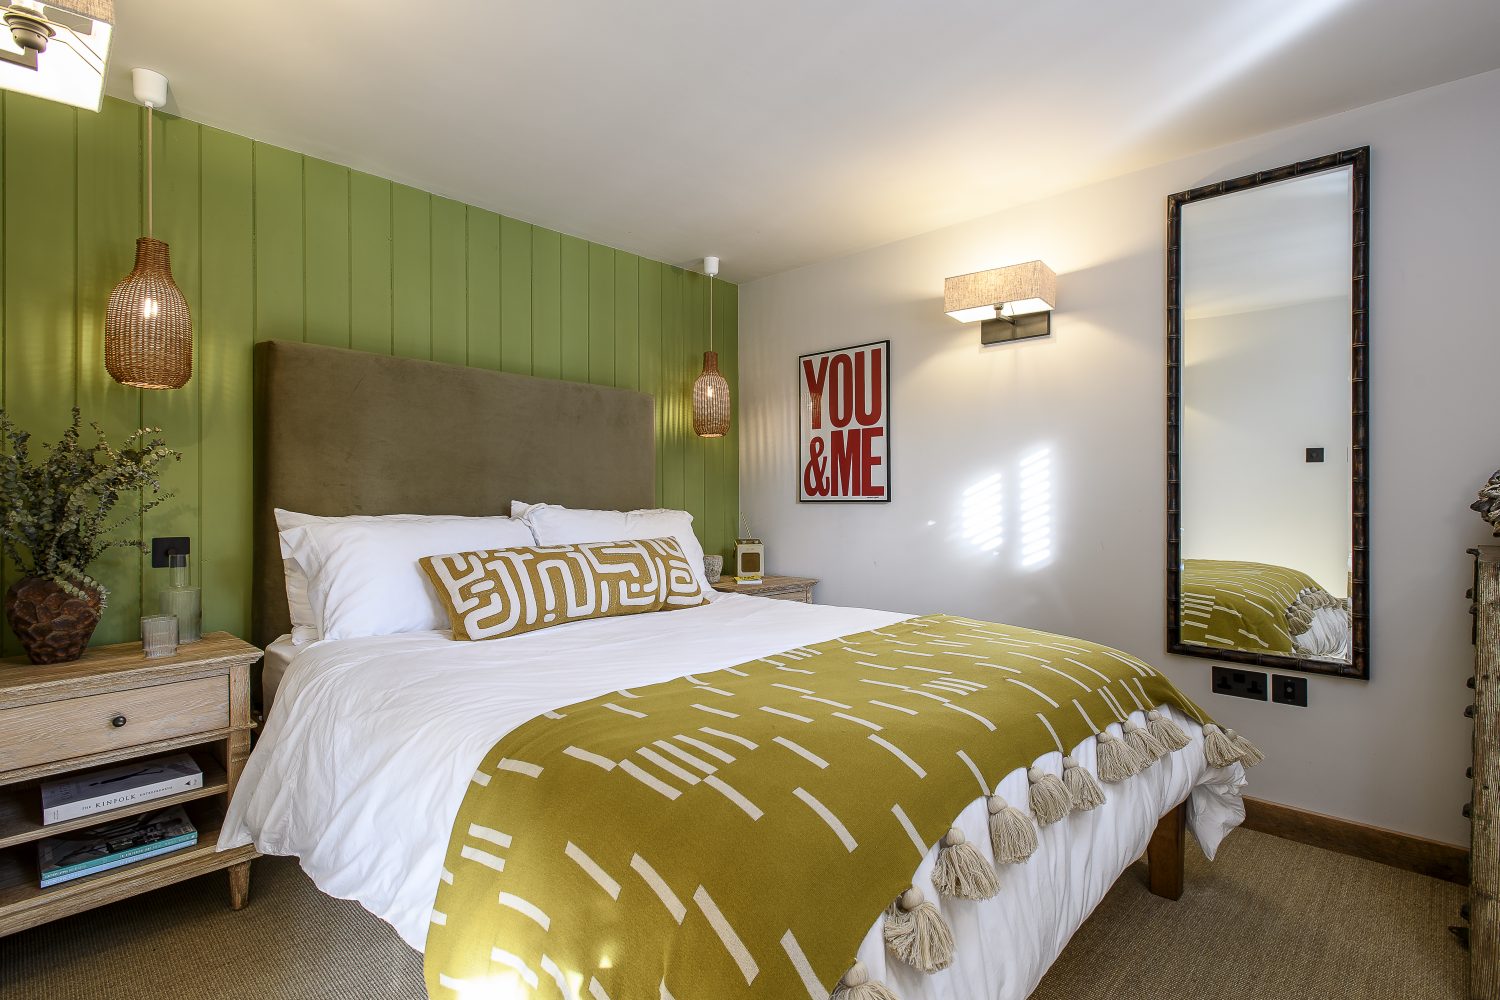 The simply furnished bedroom is set off by a panelled back wall and a bespoke headboard designed by Ben